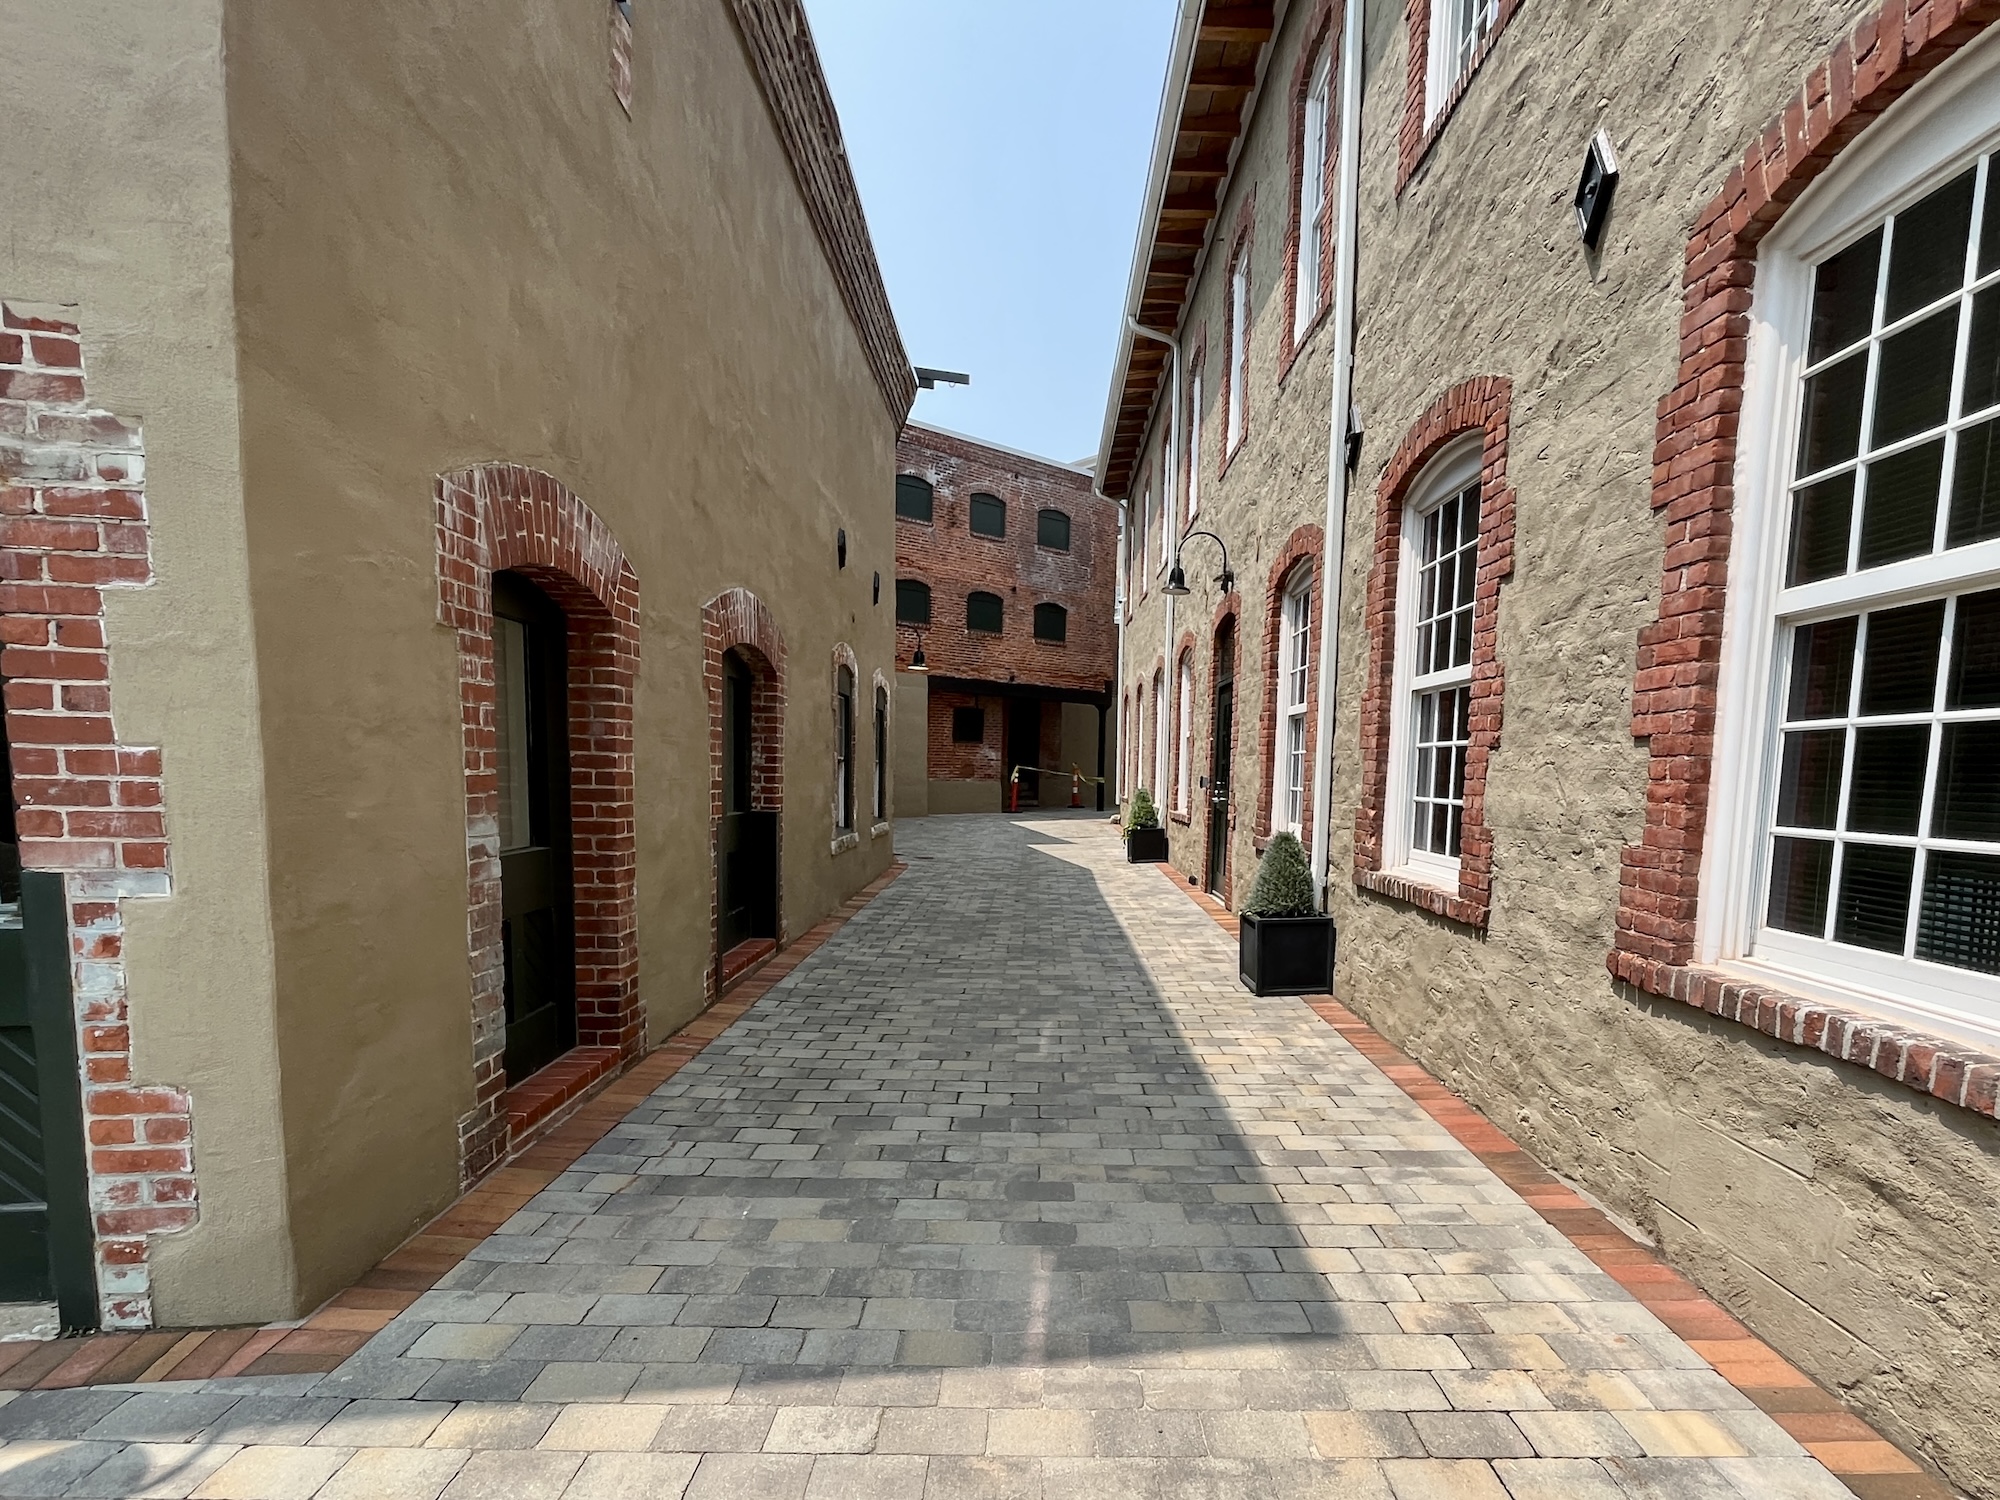 The winding corridor between the narrow stucco buildings of Pontiac Mills, known as The Mews